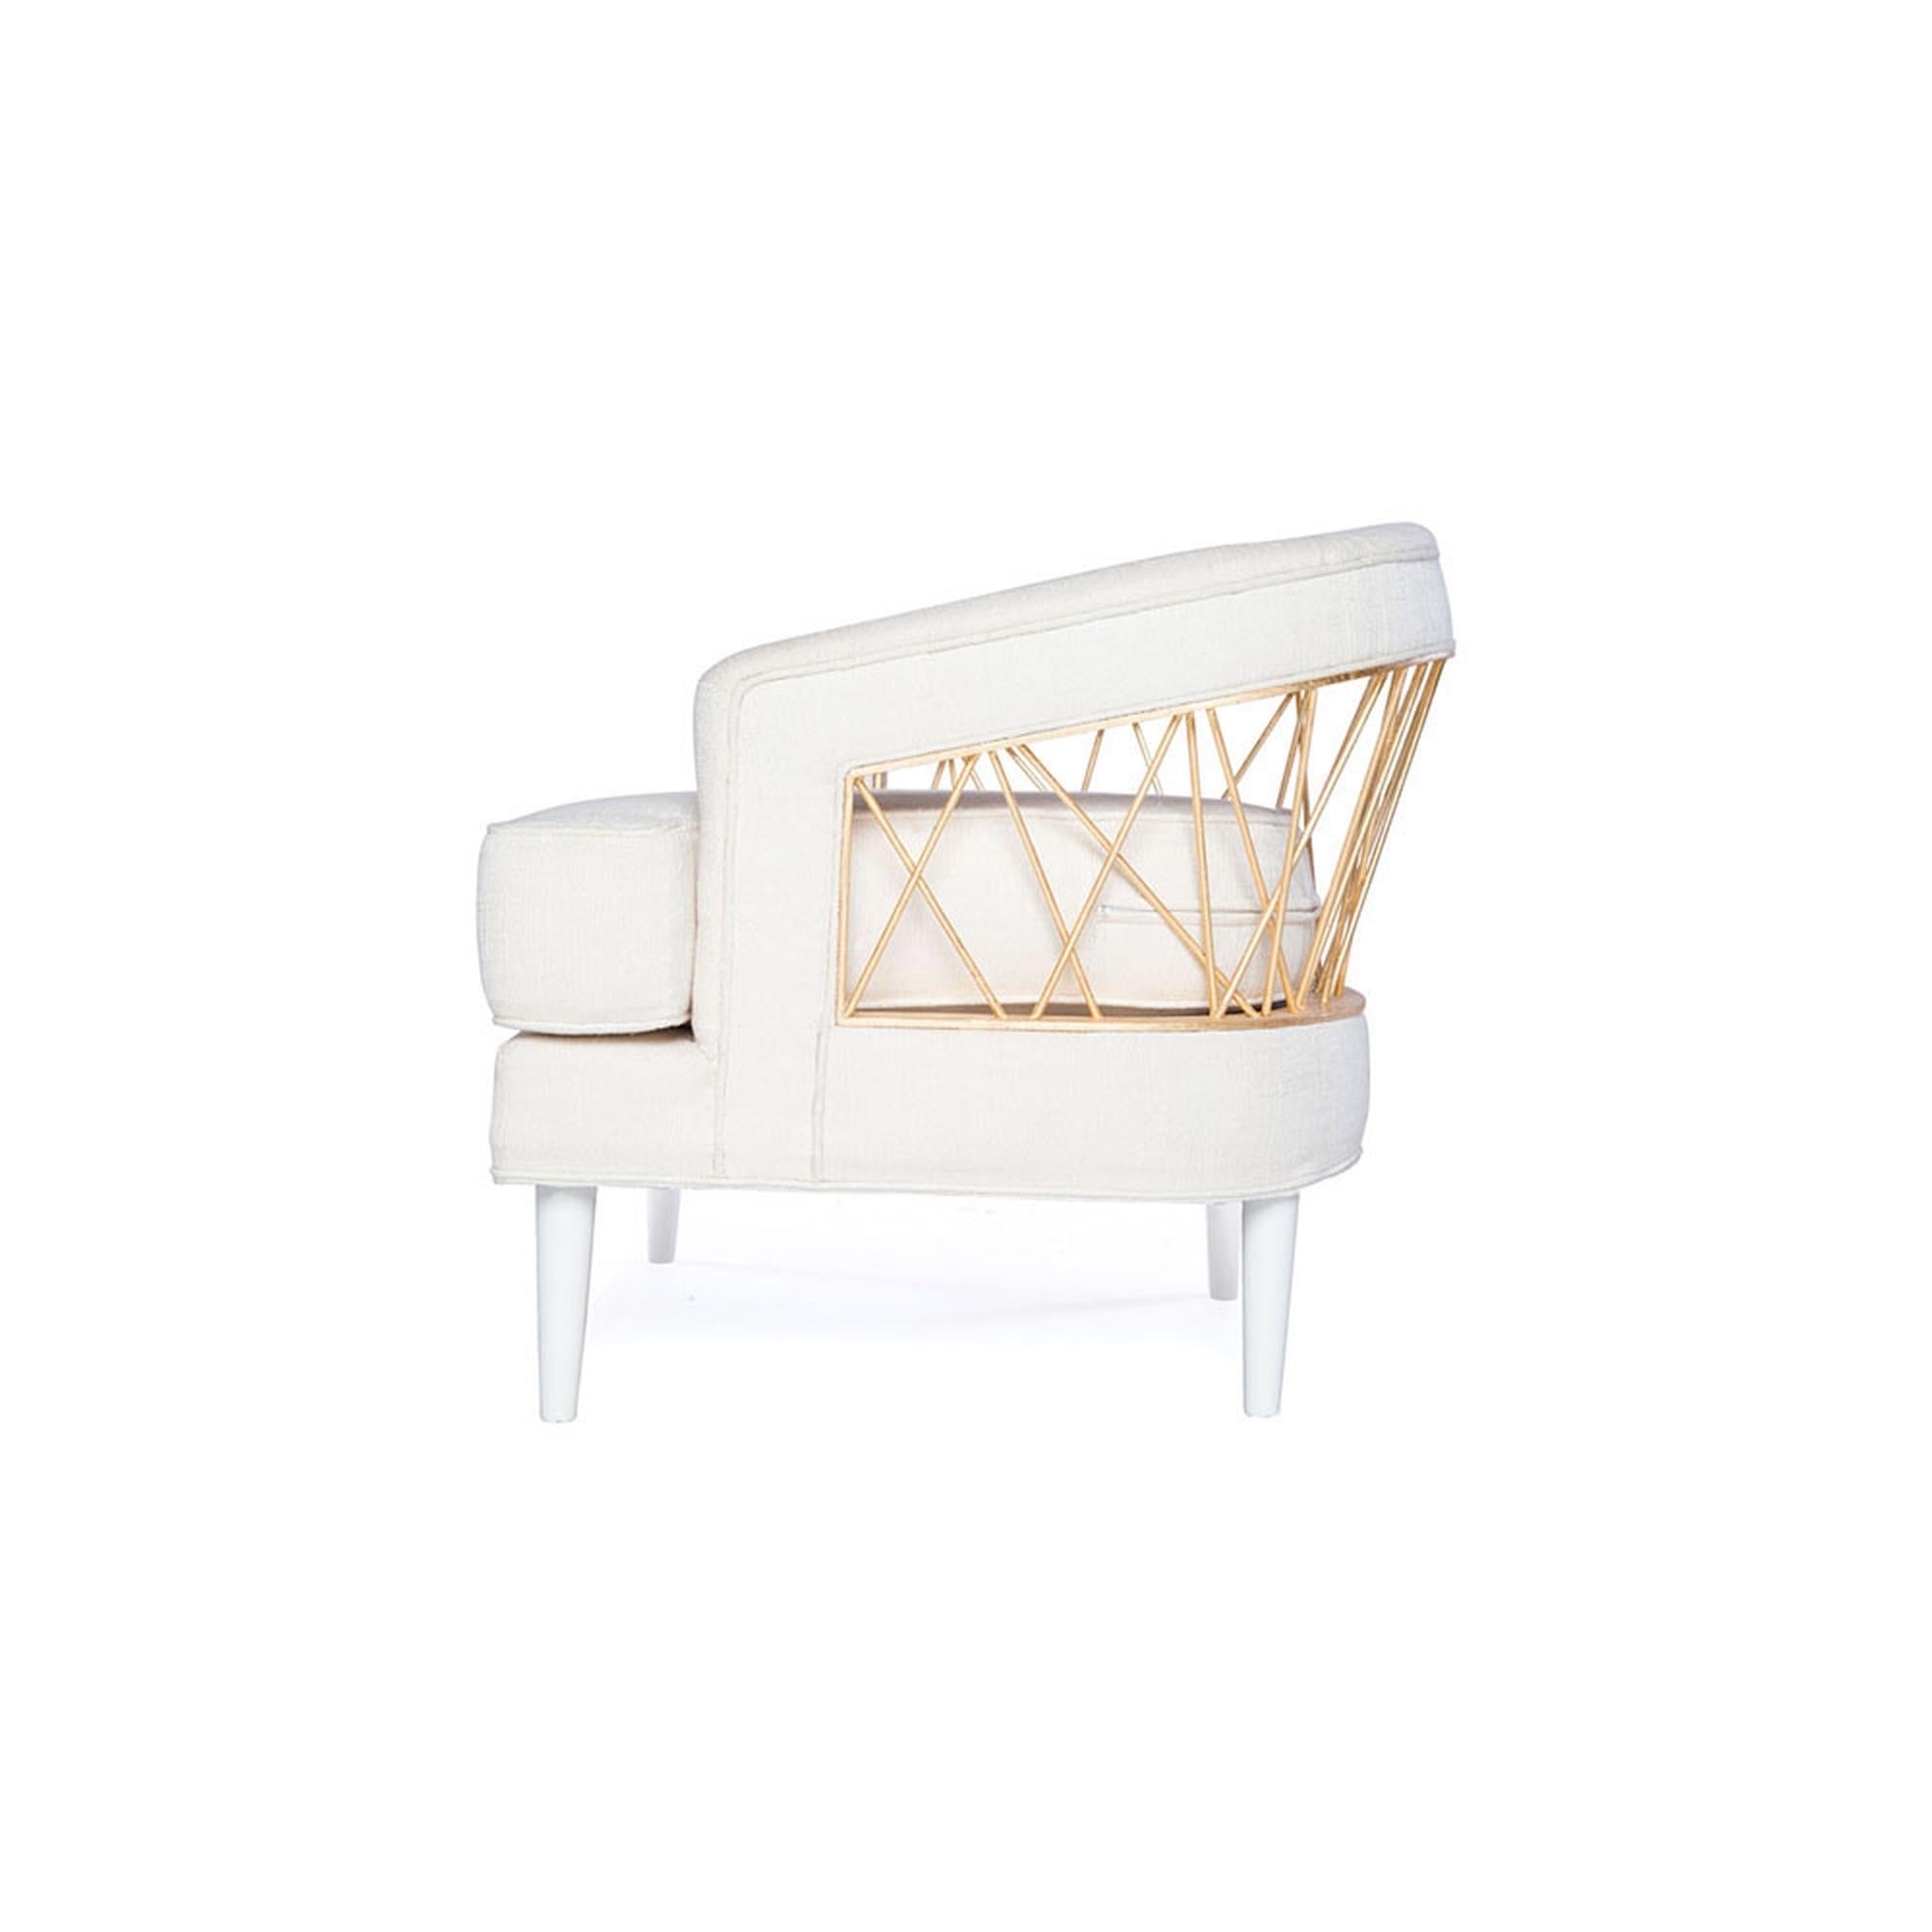 Contemporary Monterey Lounge Chair I in White with Gold Details by Innova Luxuxy Group For Sale